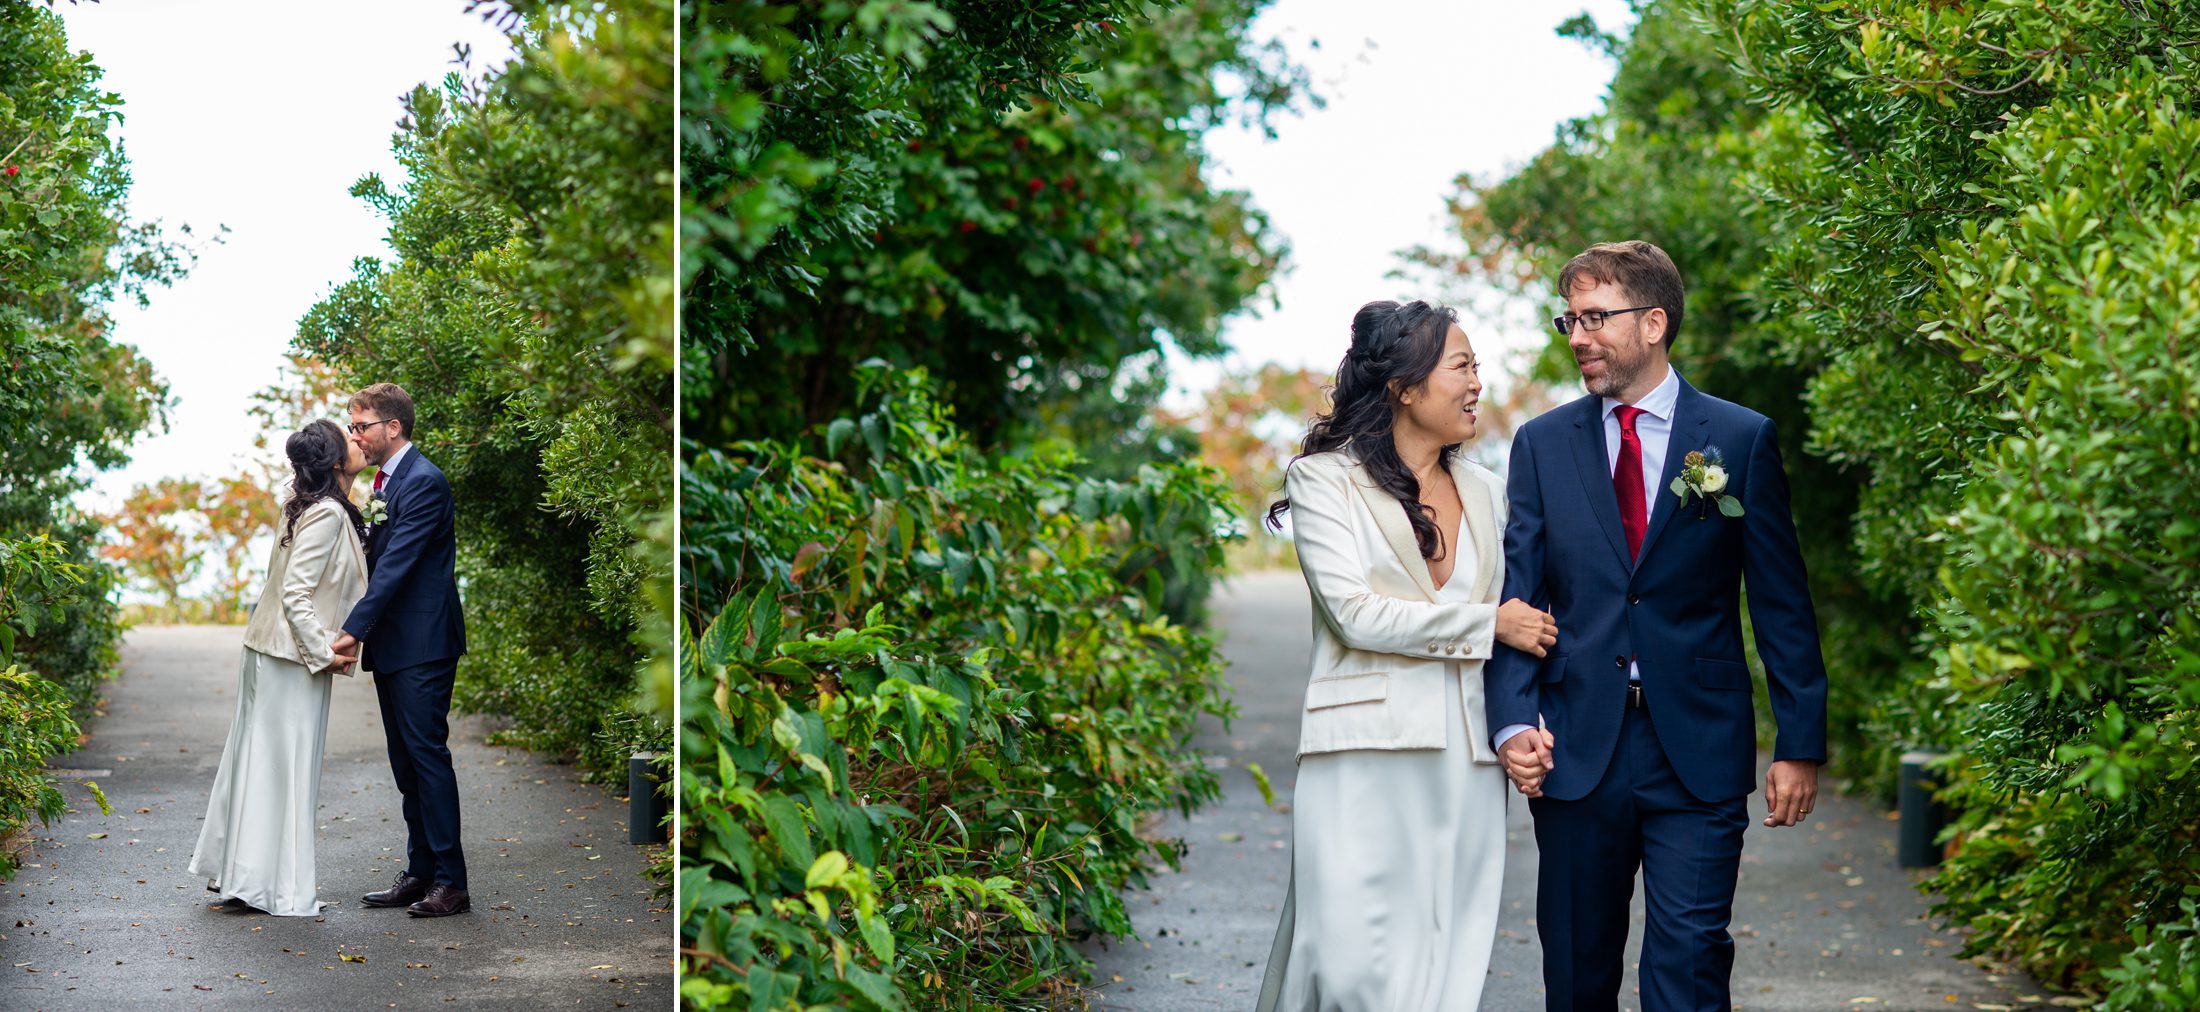 Bride and groom walking on a path with tall green bushes. 